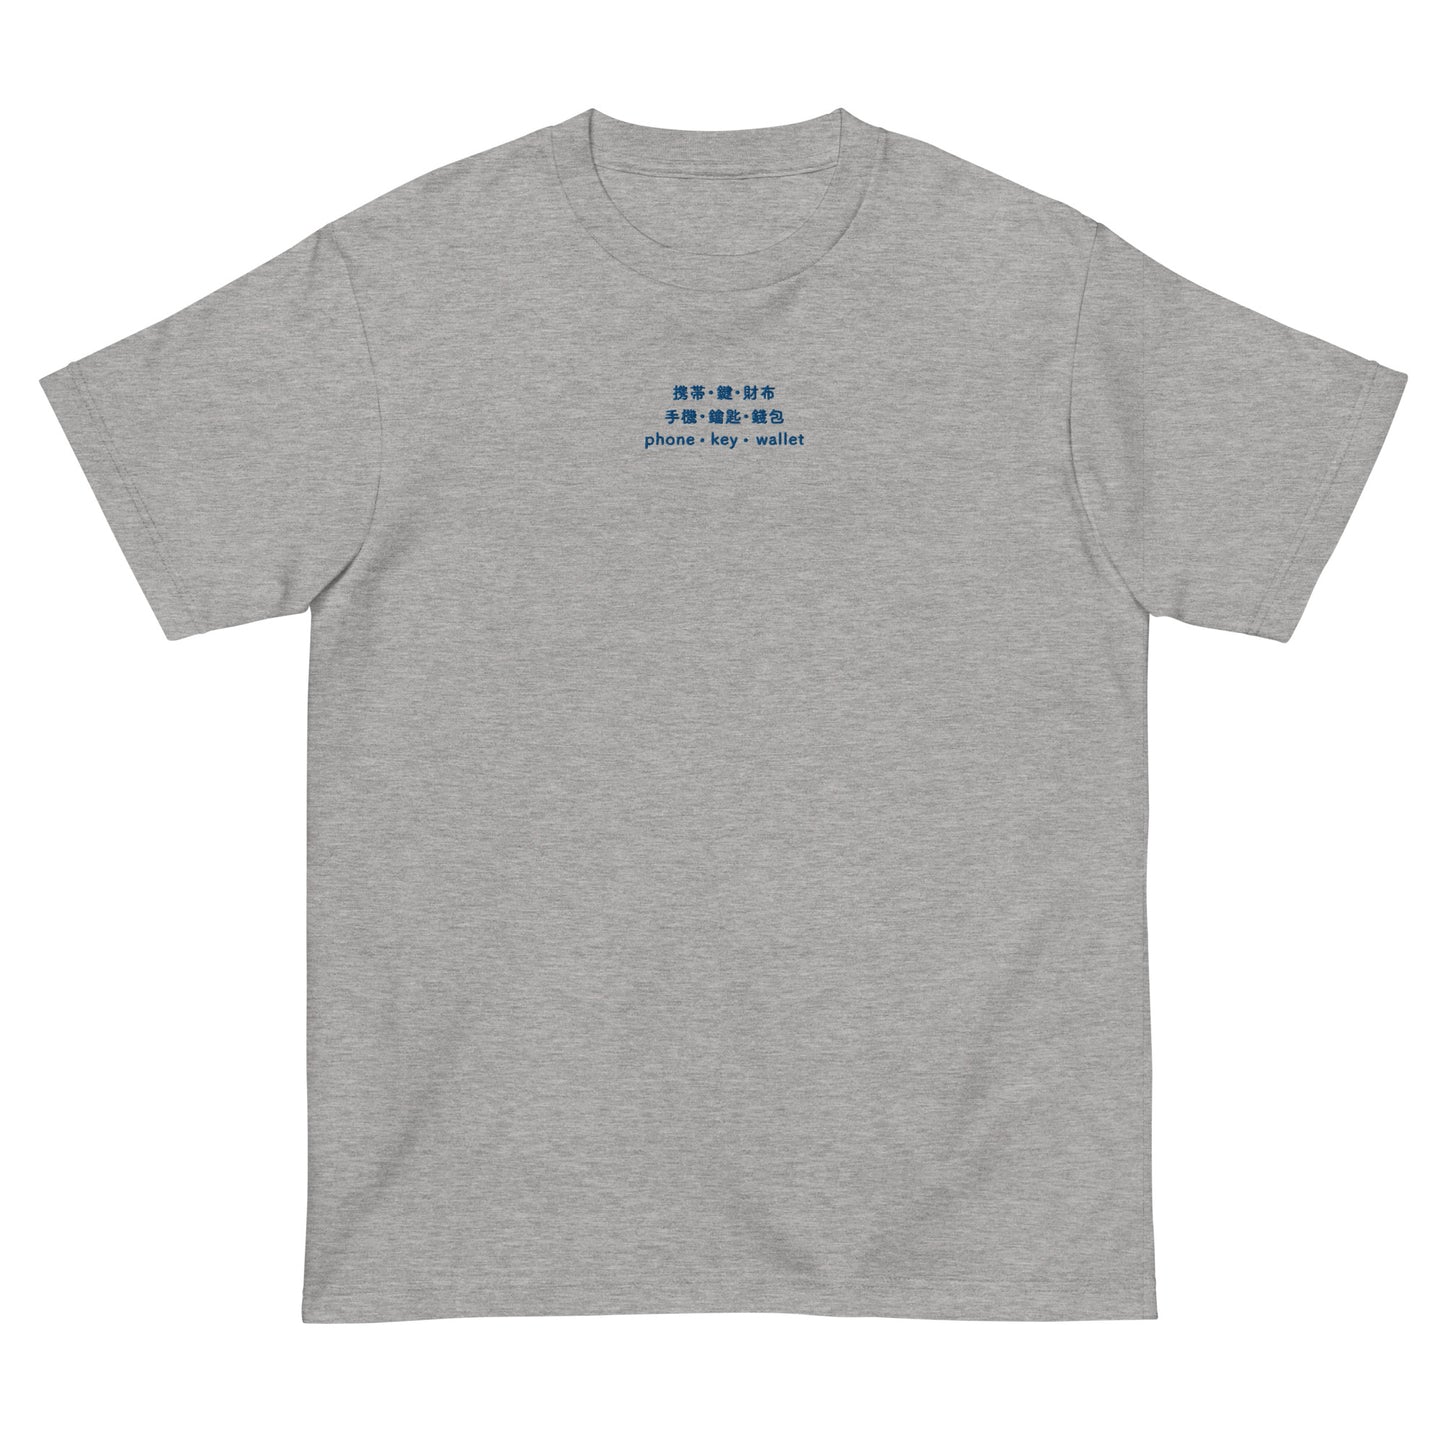 Light Gray High Quality Tee - Front Design with an Blue Embroidery "Phone/Key/Wallet" in Japanese,Chinese and English